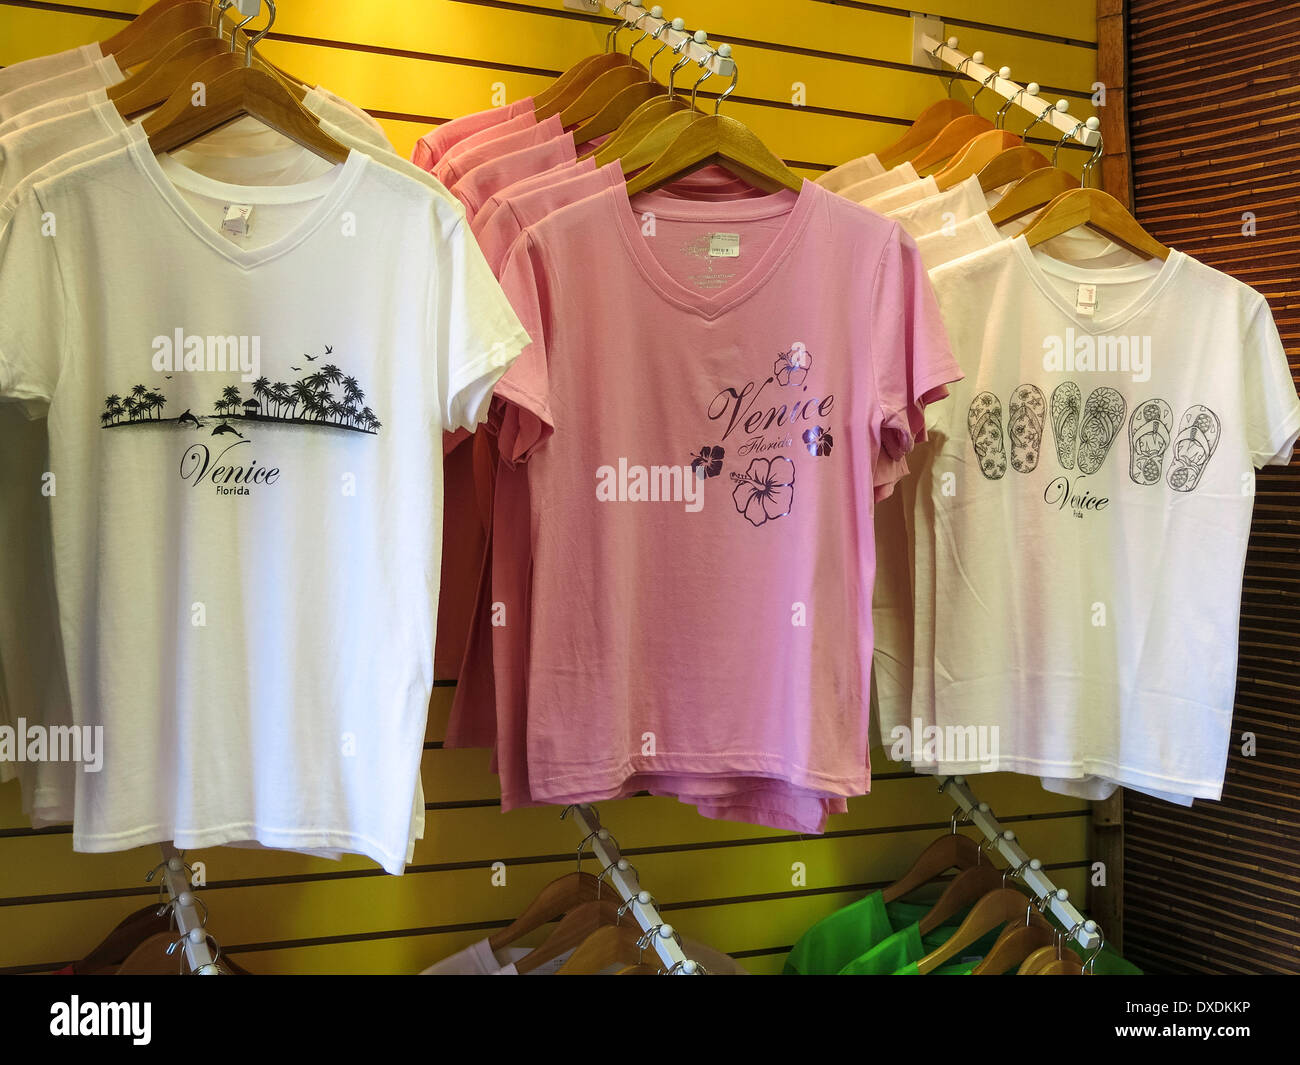 T-shirts Hanging in Venice, Florida Shop Banque D'Images